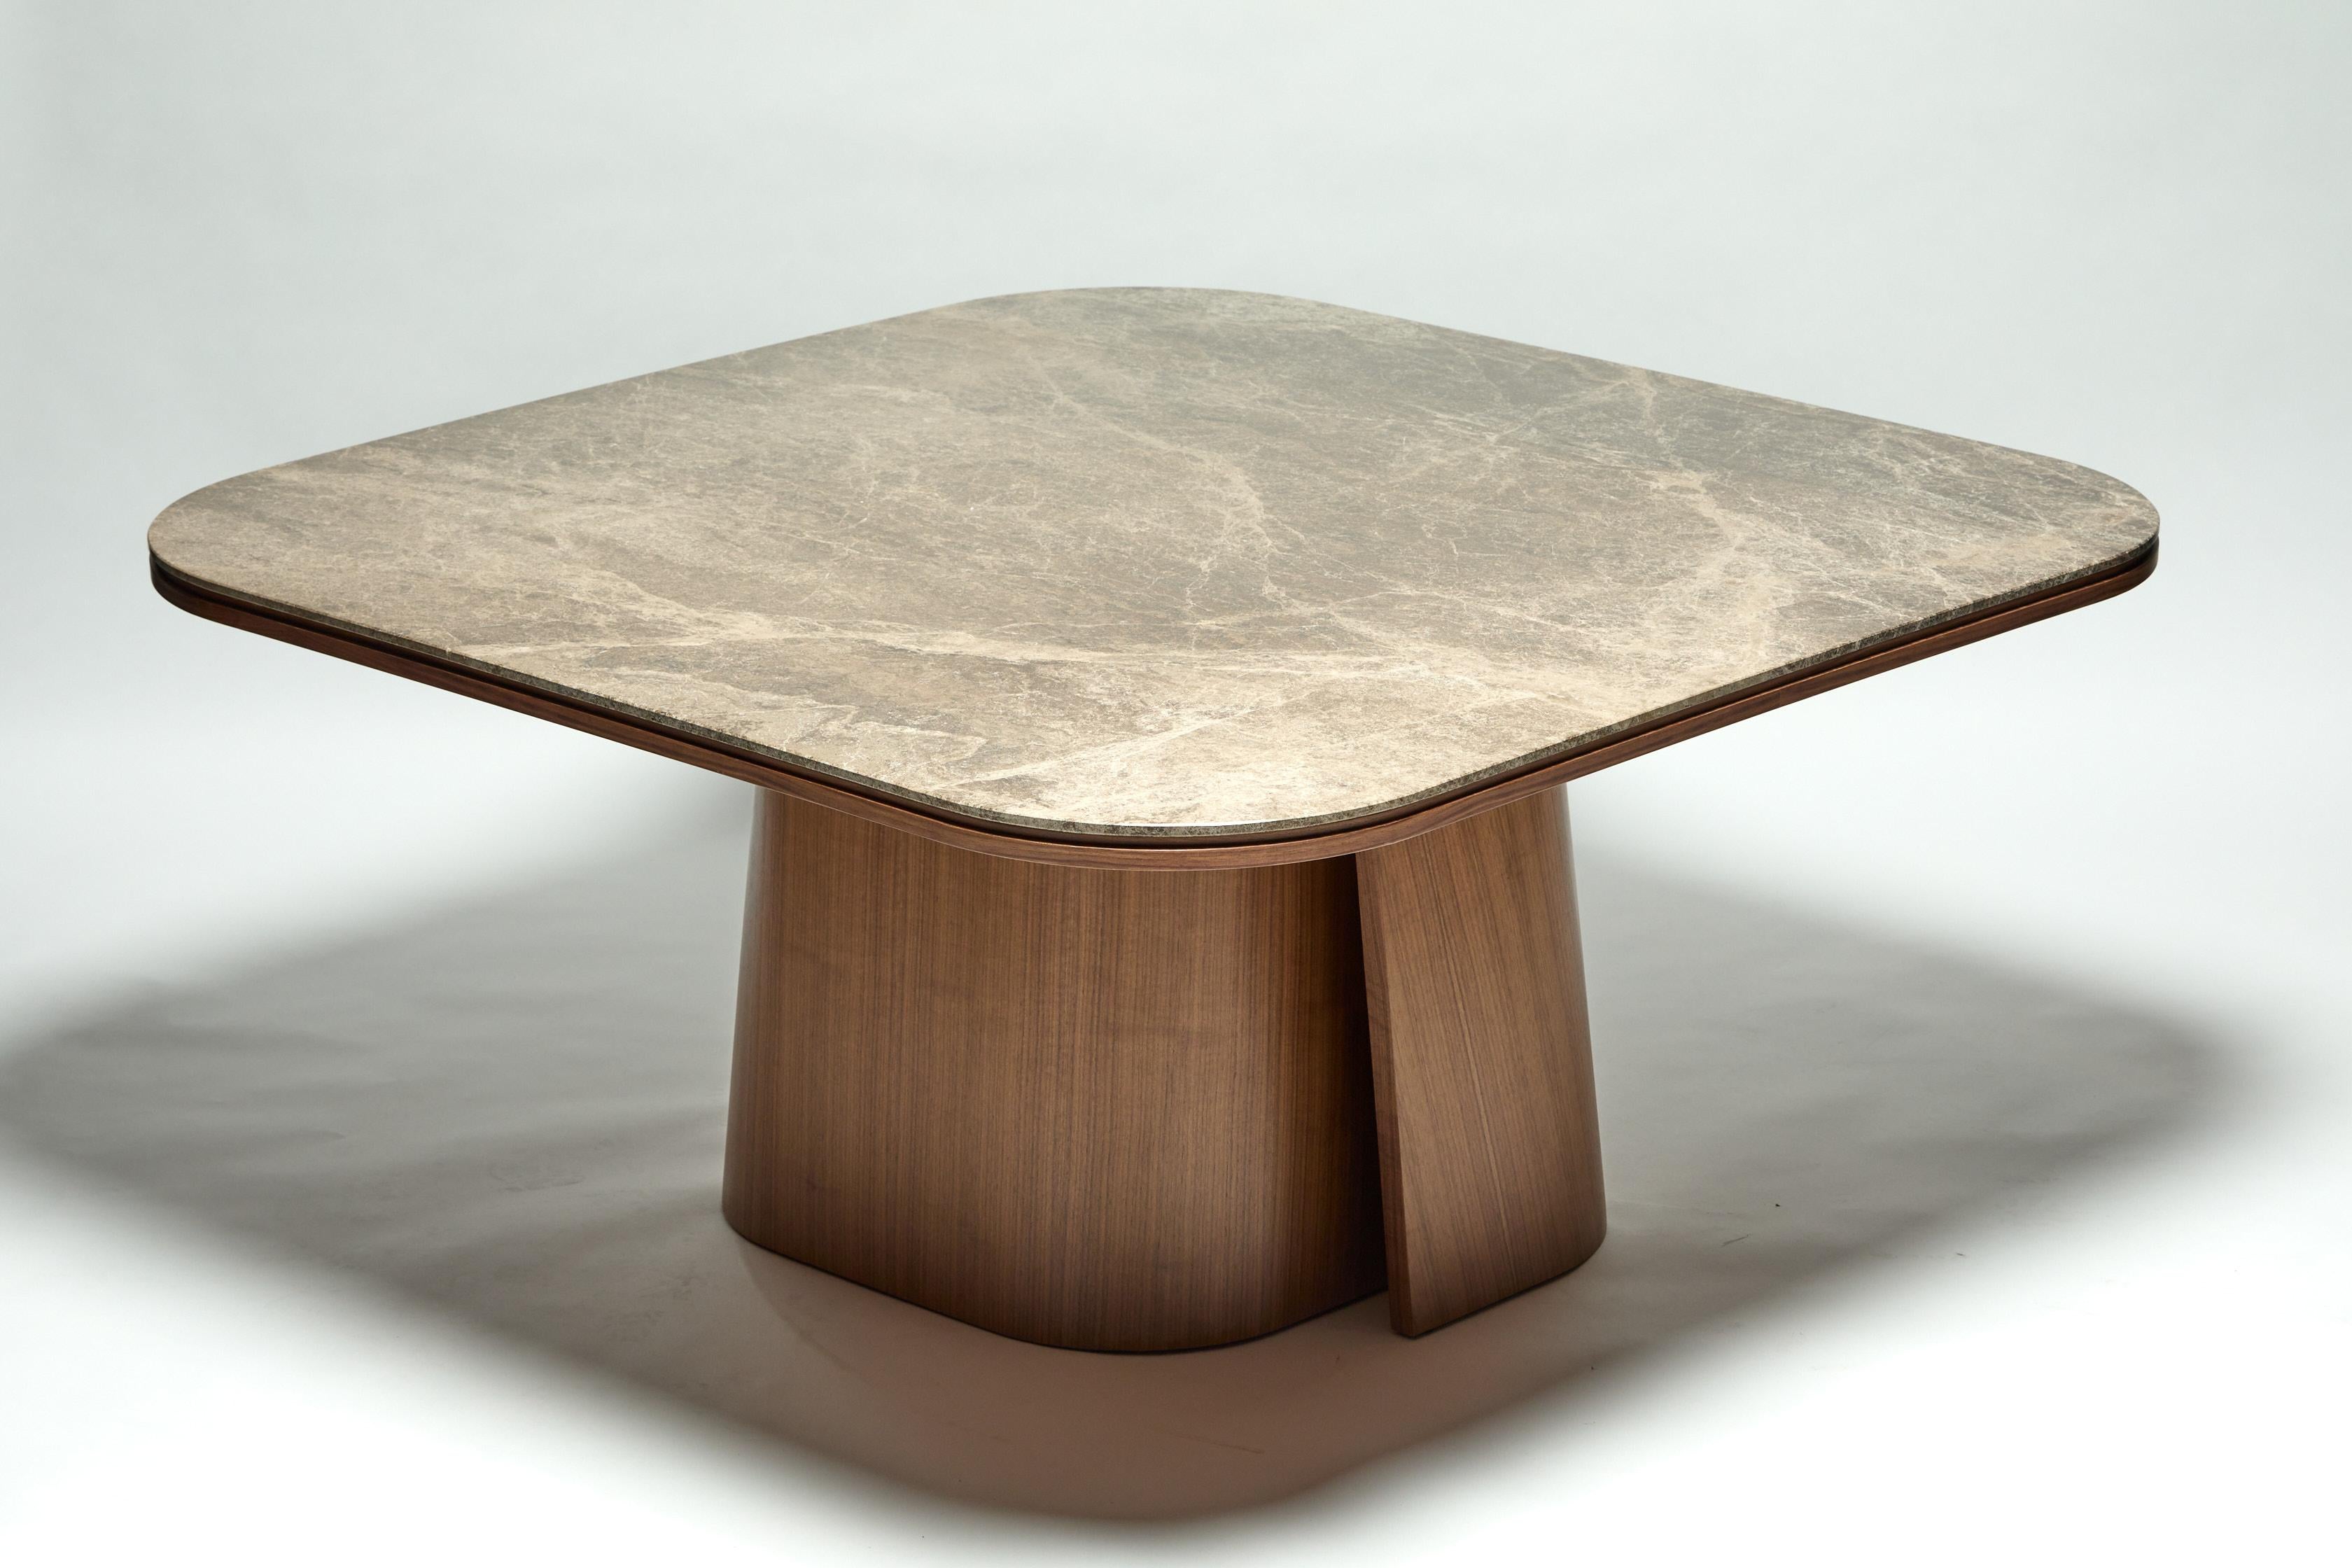 The OOMA table reflects Reda Amalou’s search for a perfect balance between a pure line and the attention to detail. The proportions of the very thin elegant marble top, with its subtle edge detail, contrast with the strong curved walnut legs, giving